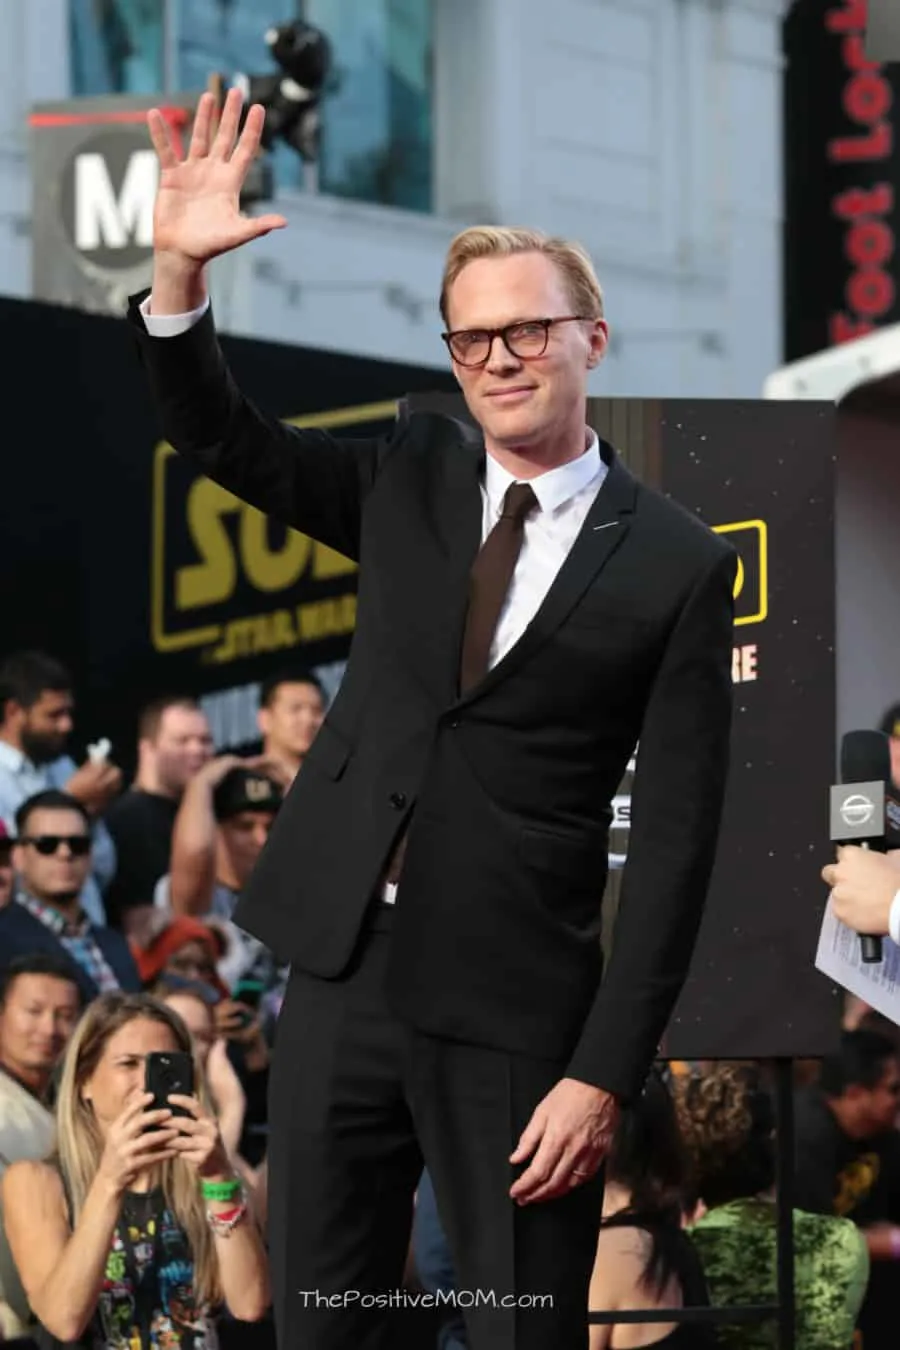 See Paul Bettany & Jennifer Connelly's Grown-Up Sons in Rare